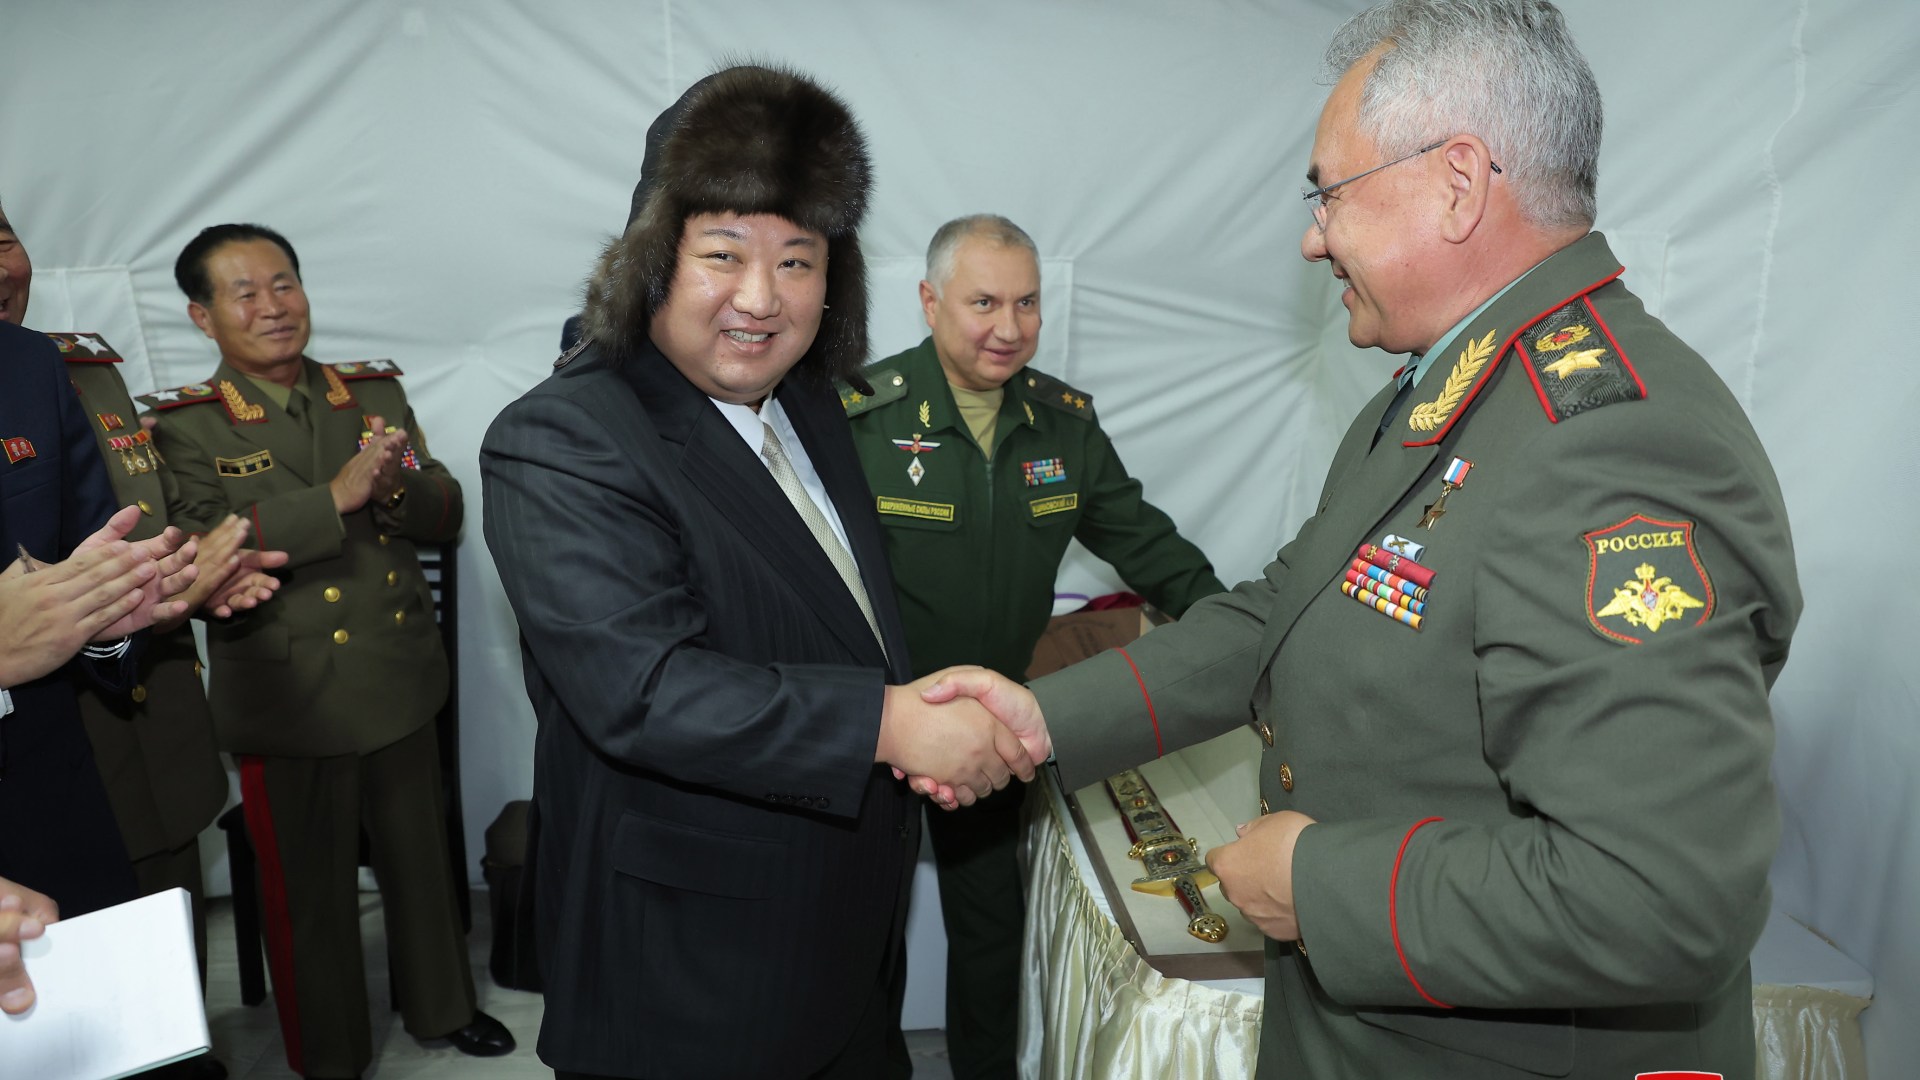 Kim Jong Un wears a Russian fur hat as he shakes hands with warmonger Putin’s defence minister